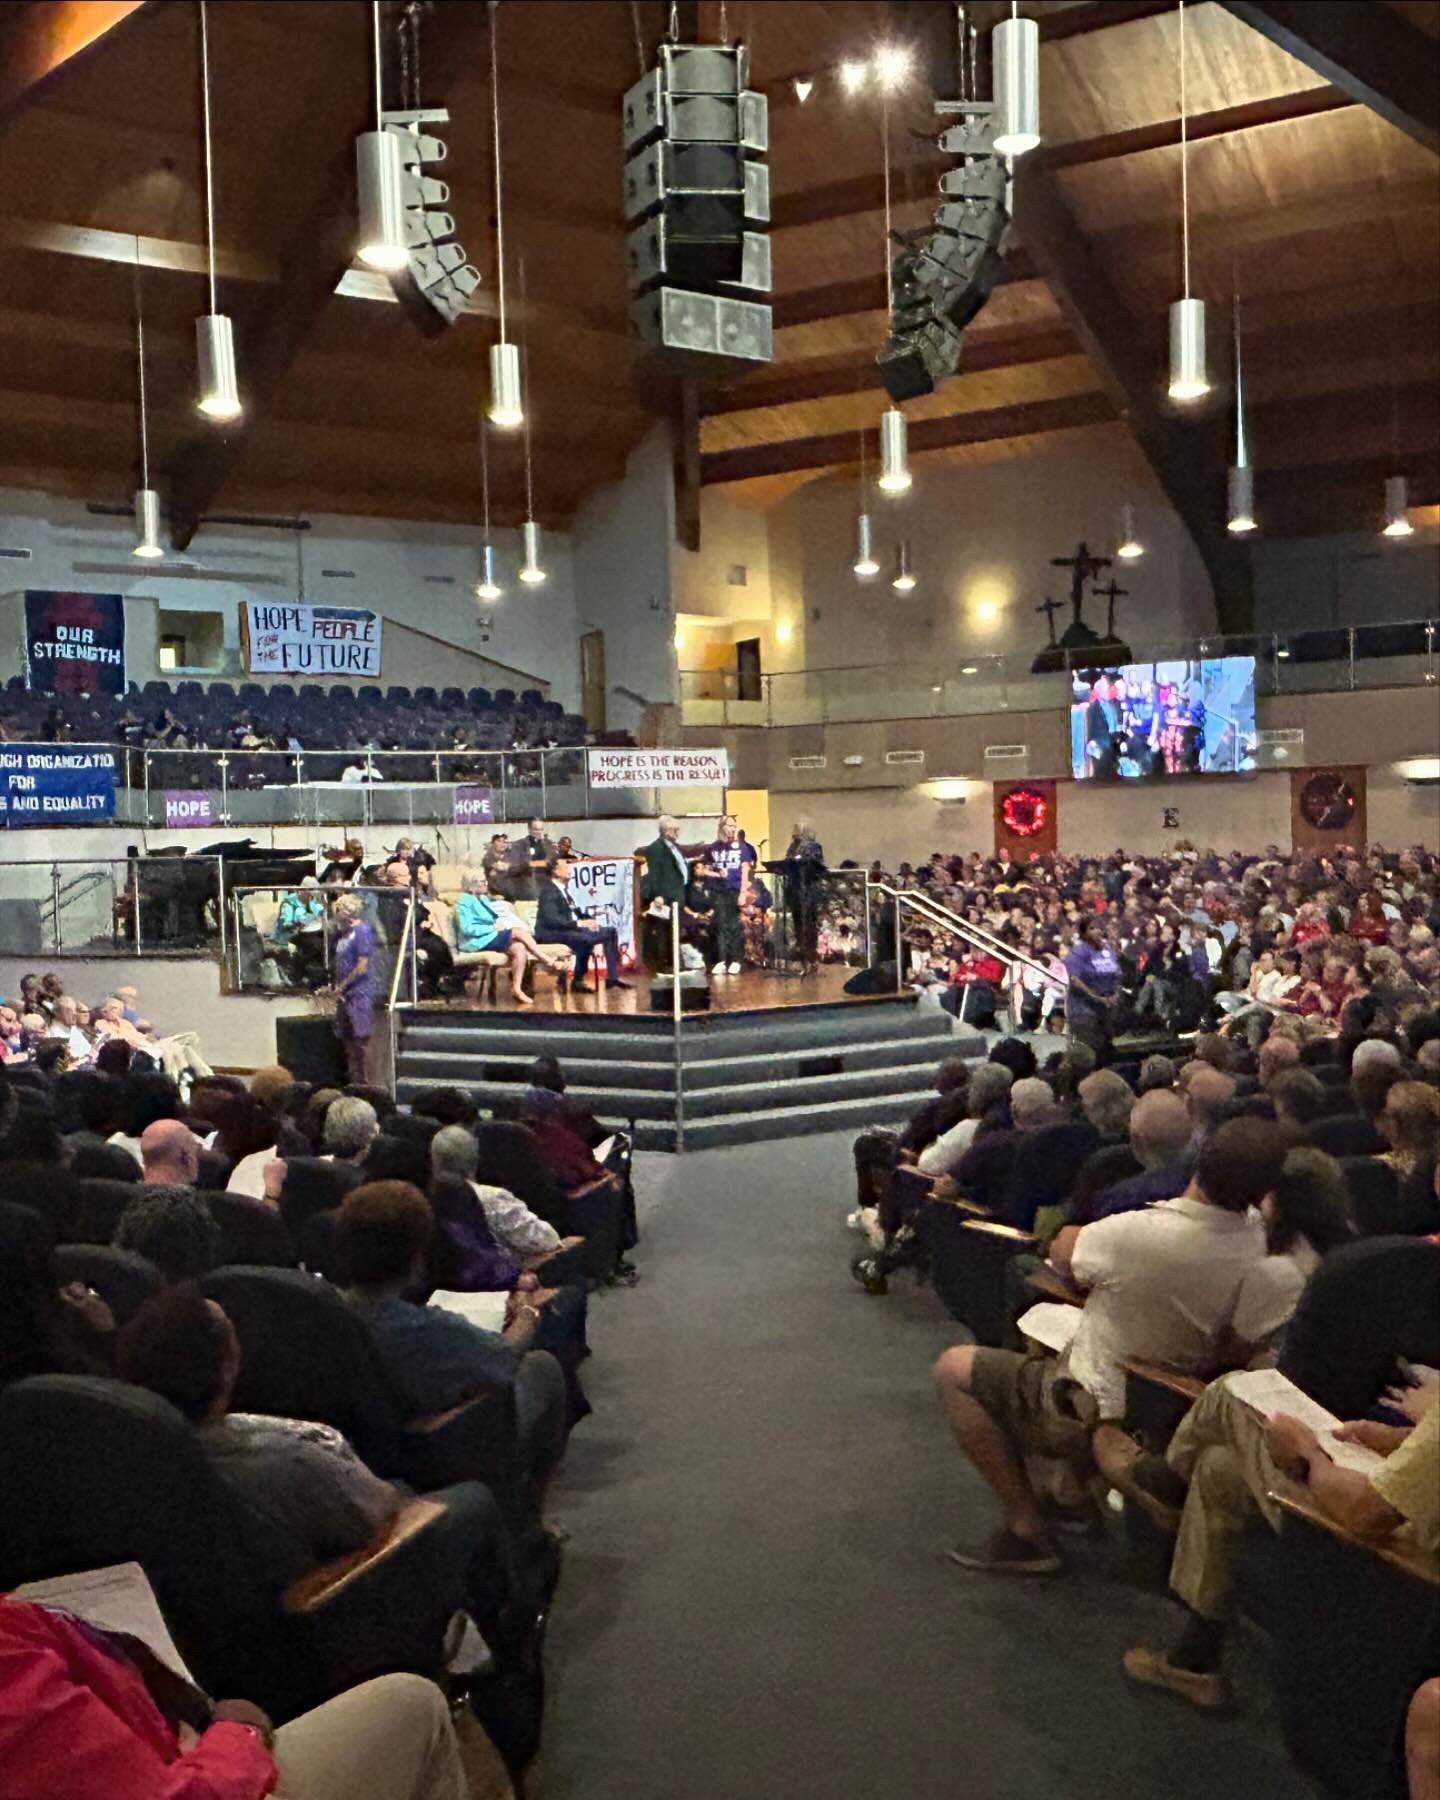 What a powerful and inspiring night bringing together over 1,100 community members and local decision makers to address affordable housing, mental health, criminal justice, and environmental needs in Hillsborough County.